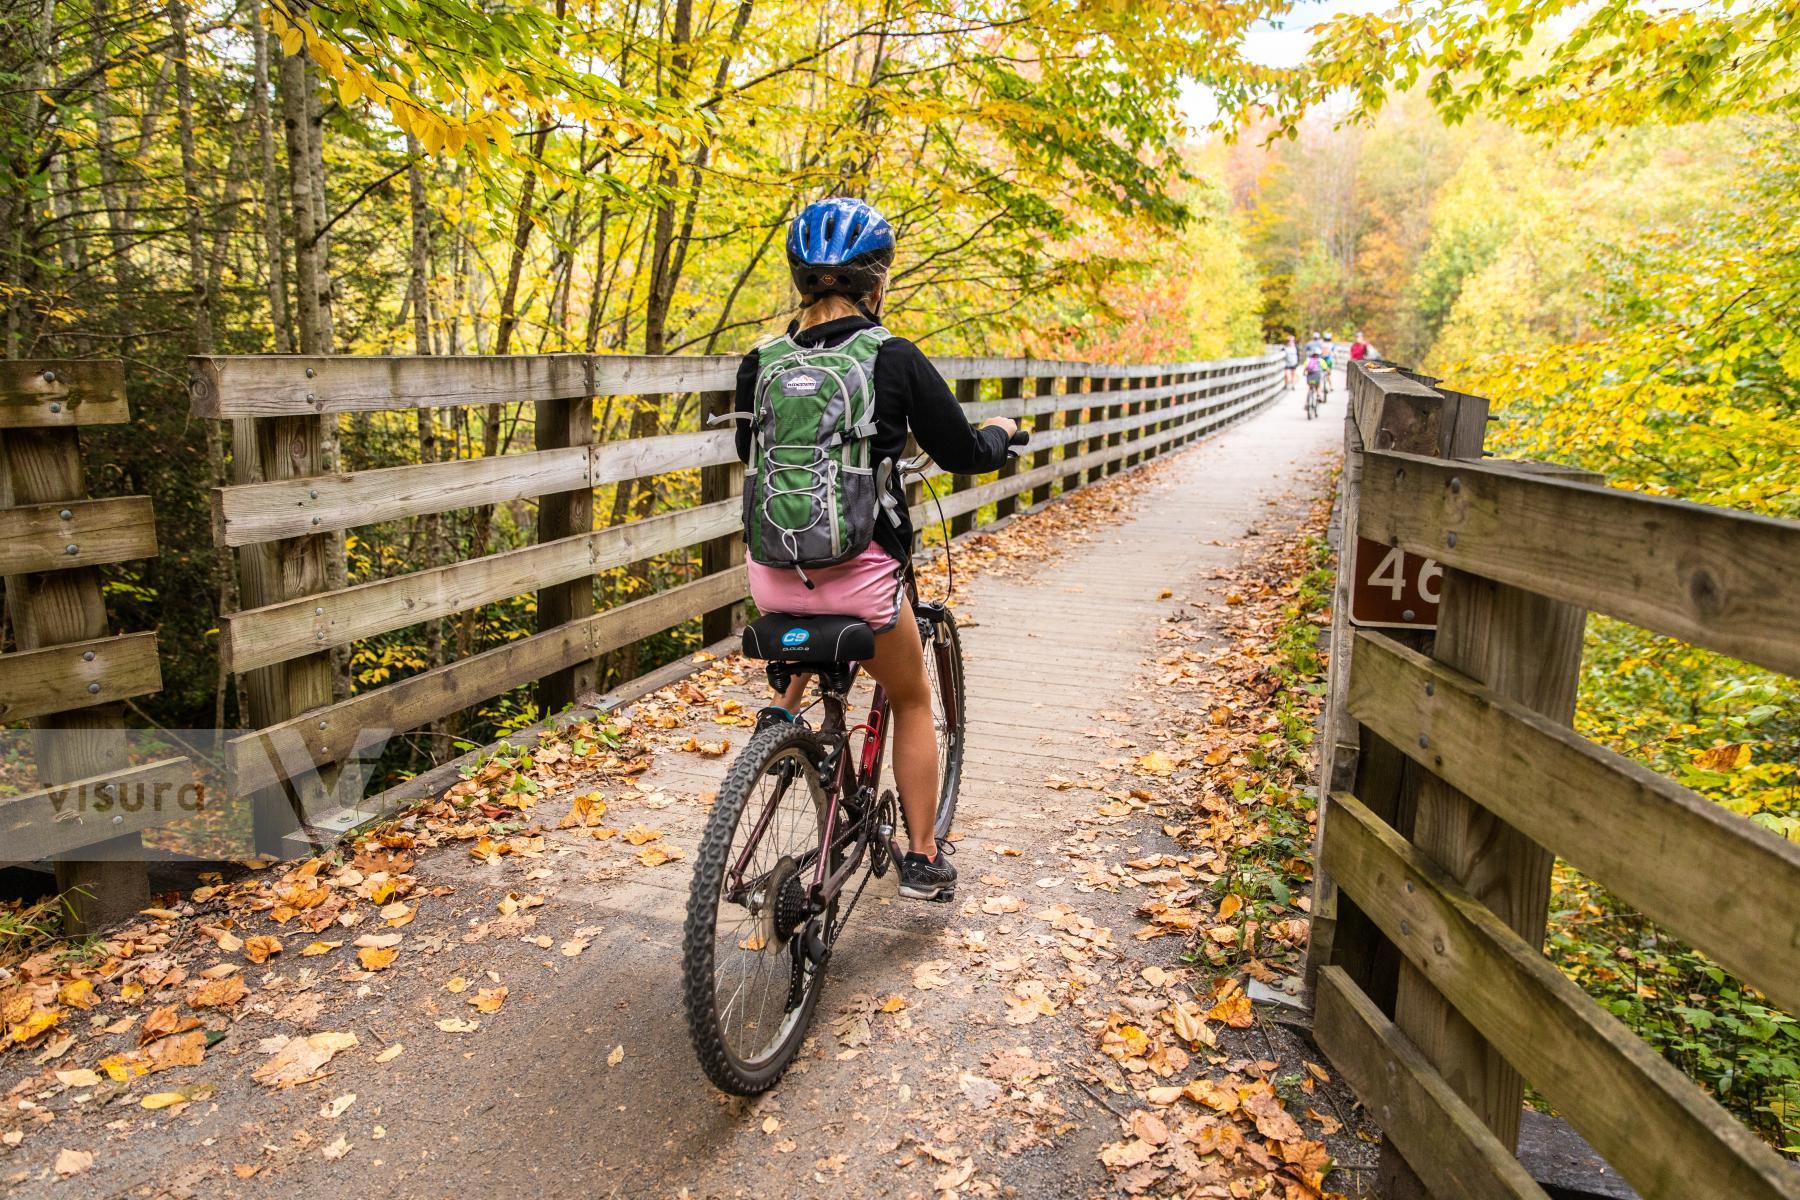 Purchase Downhill Bike Trail in Virginia is a Fun Fall Family Activity by Katie Linsky Shaw